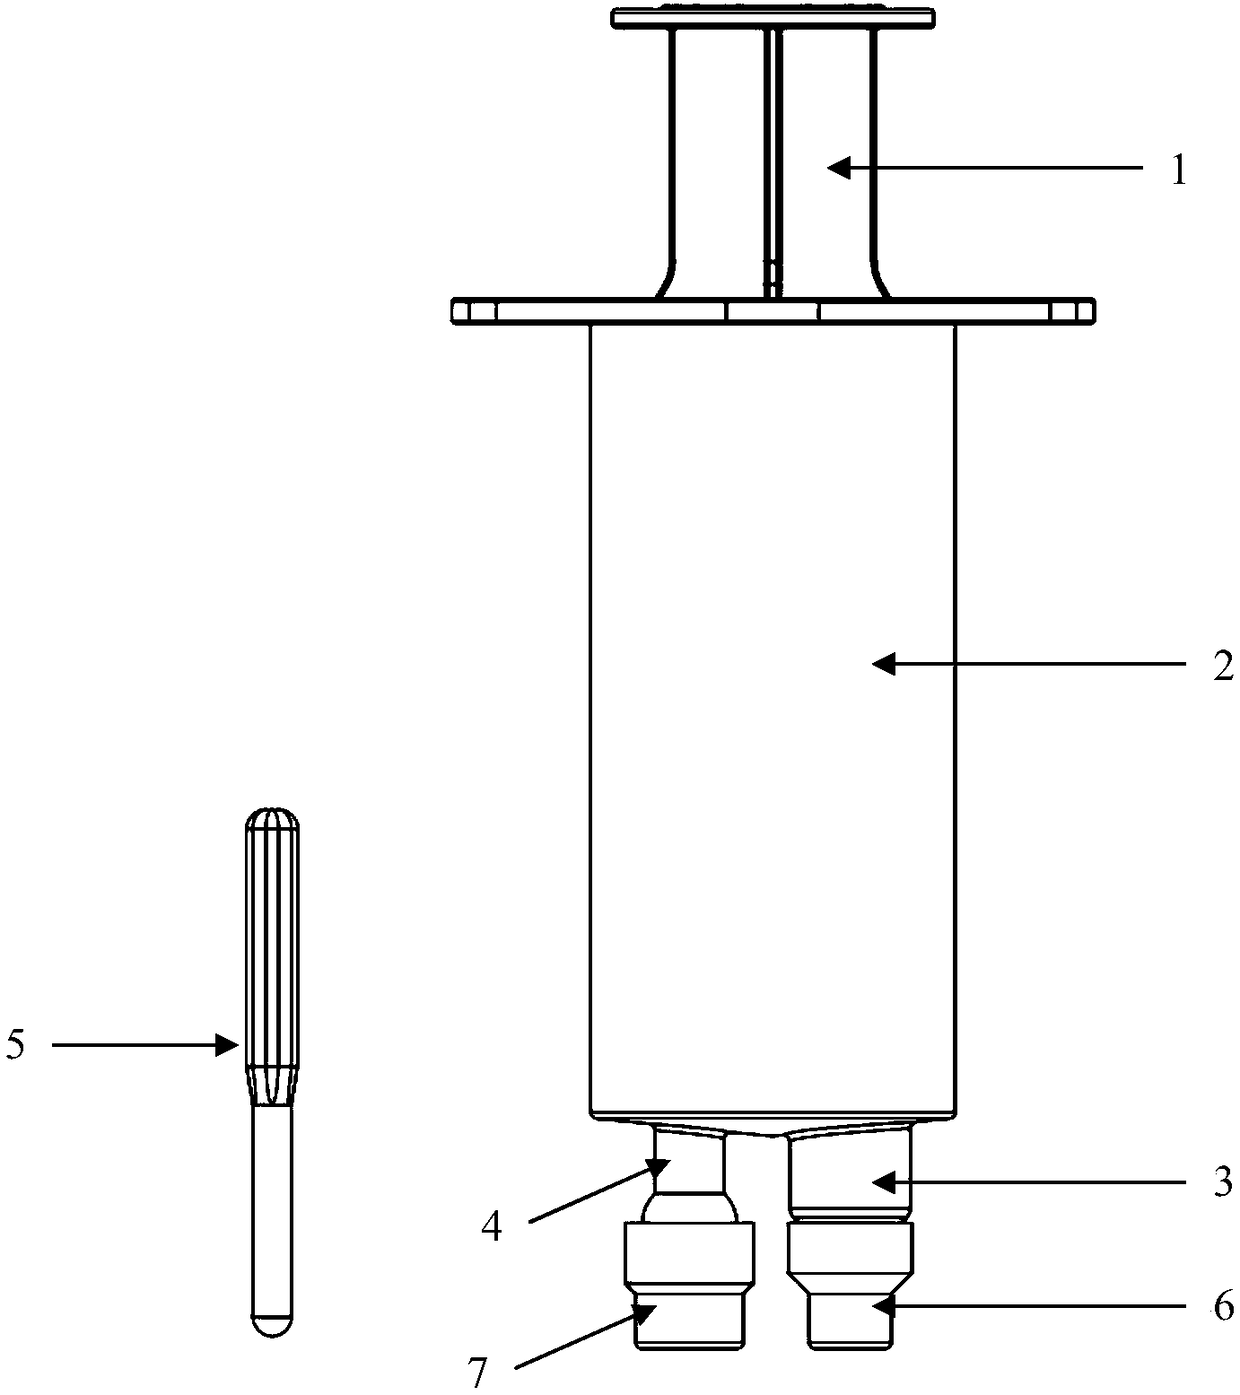 Quick nucleic acid extracting device